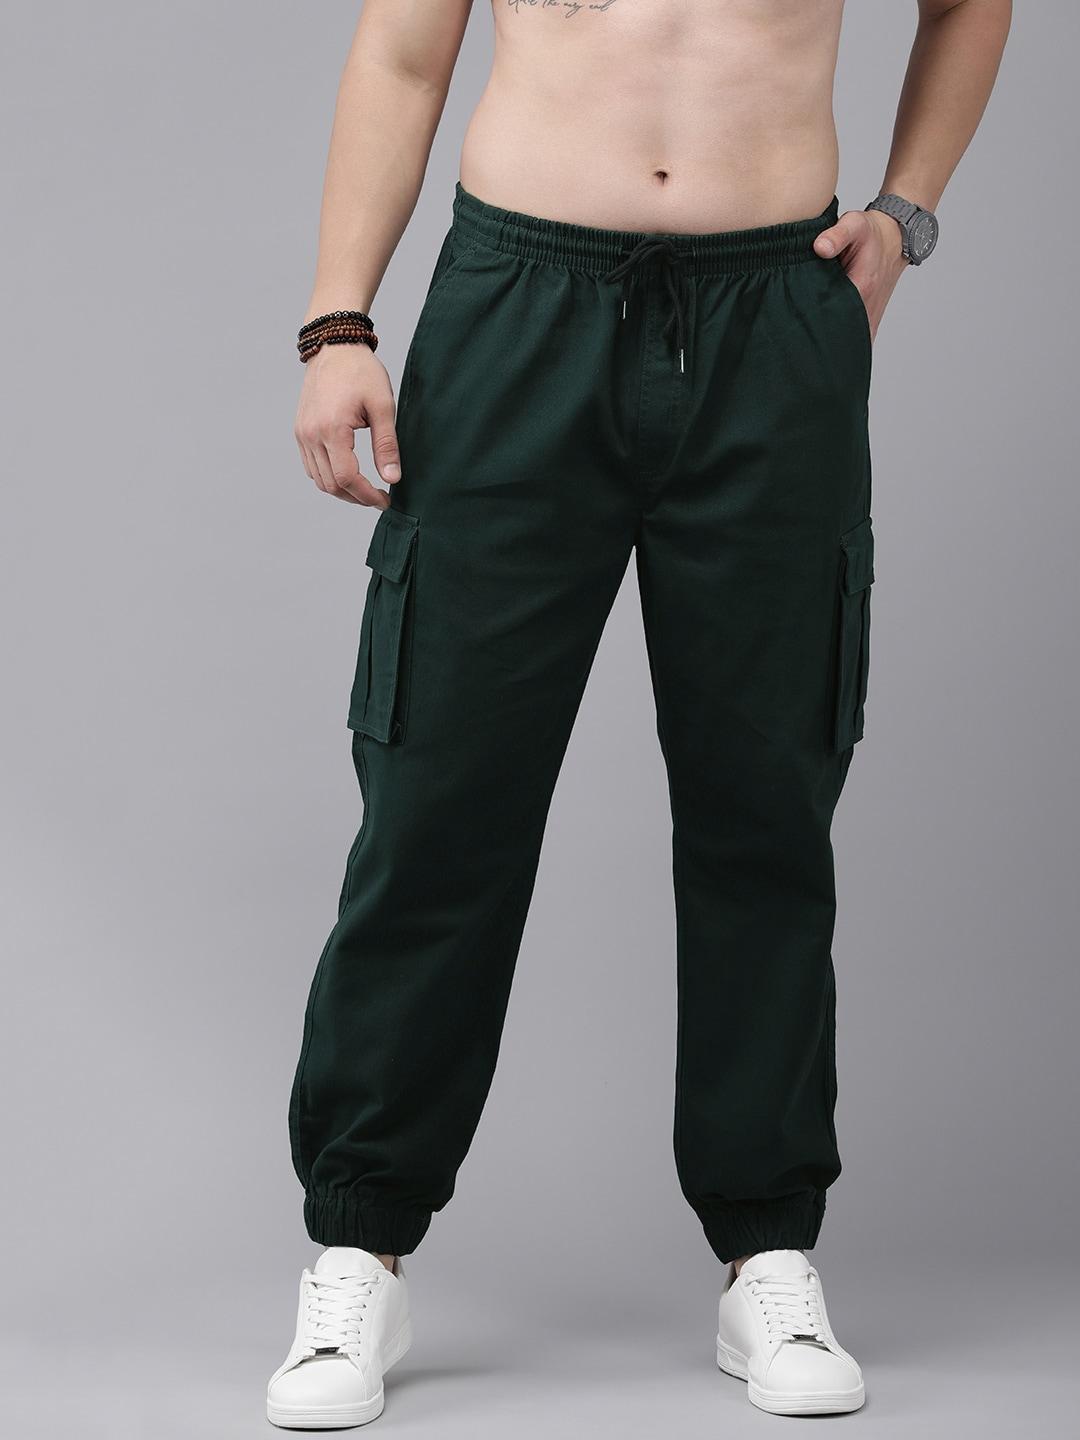 roadster-men-solid-relaxed-fit-mid-rise-plain-woven-flat-front-jogger-style-cargos